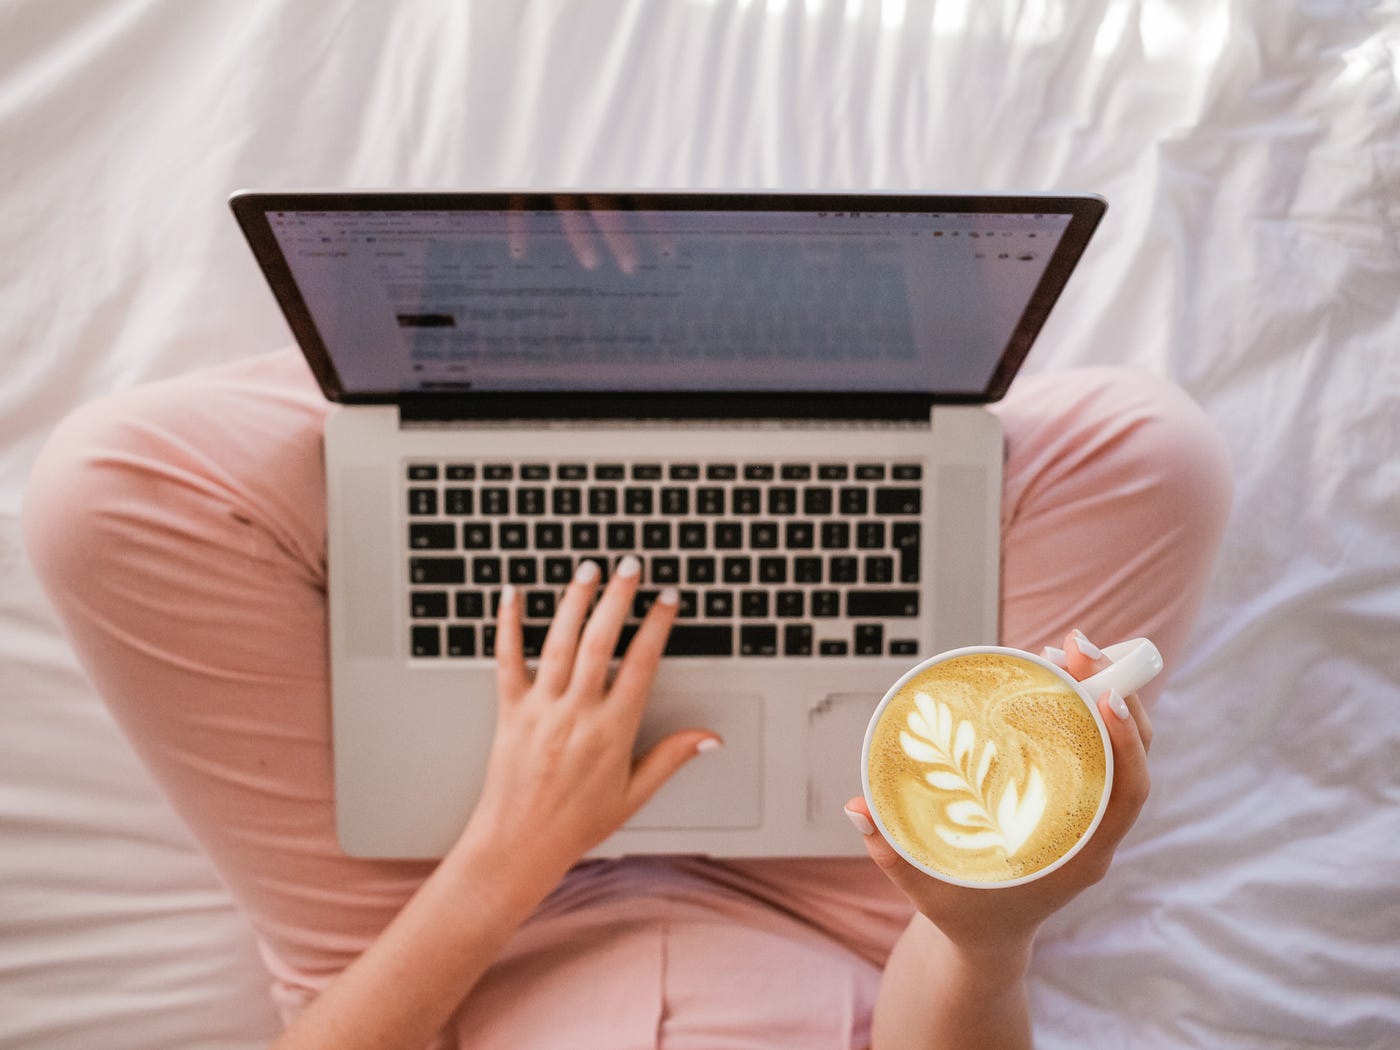 A woman with a laptop on her lap while holding a coffe